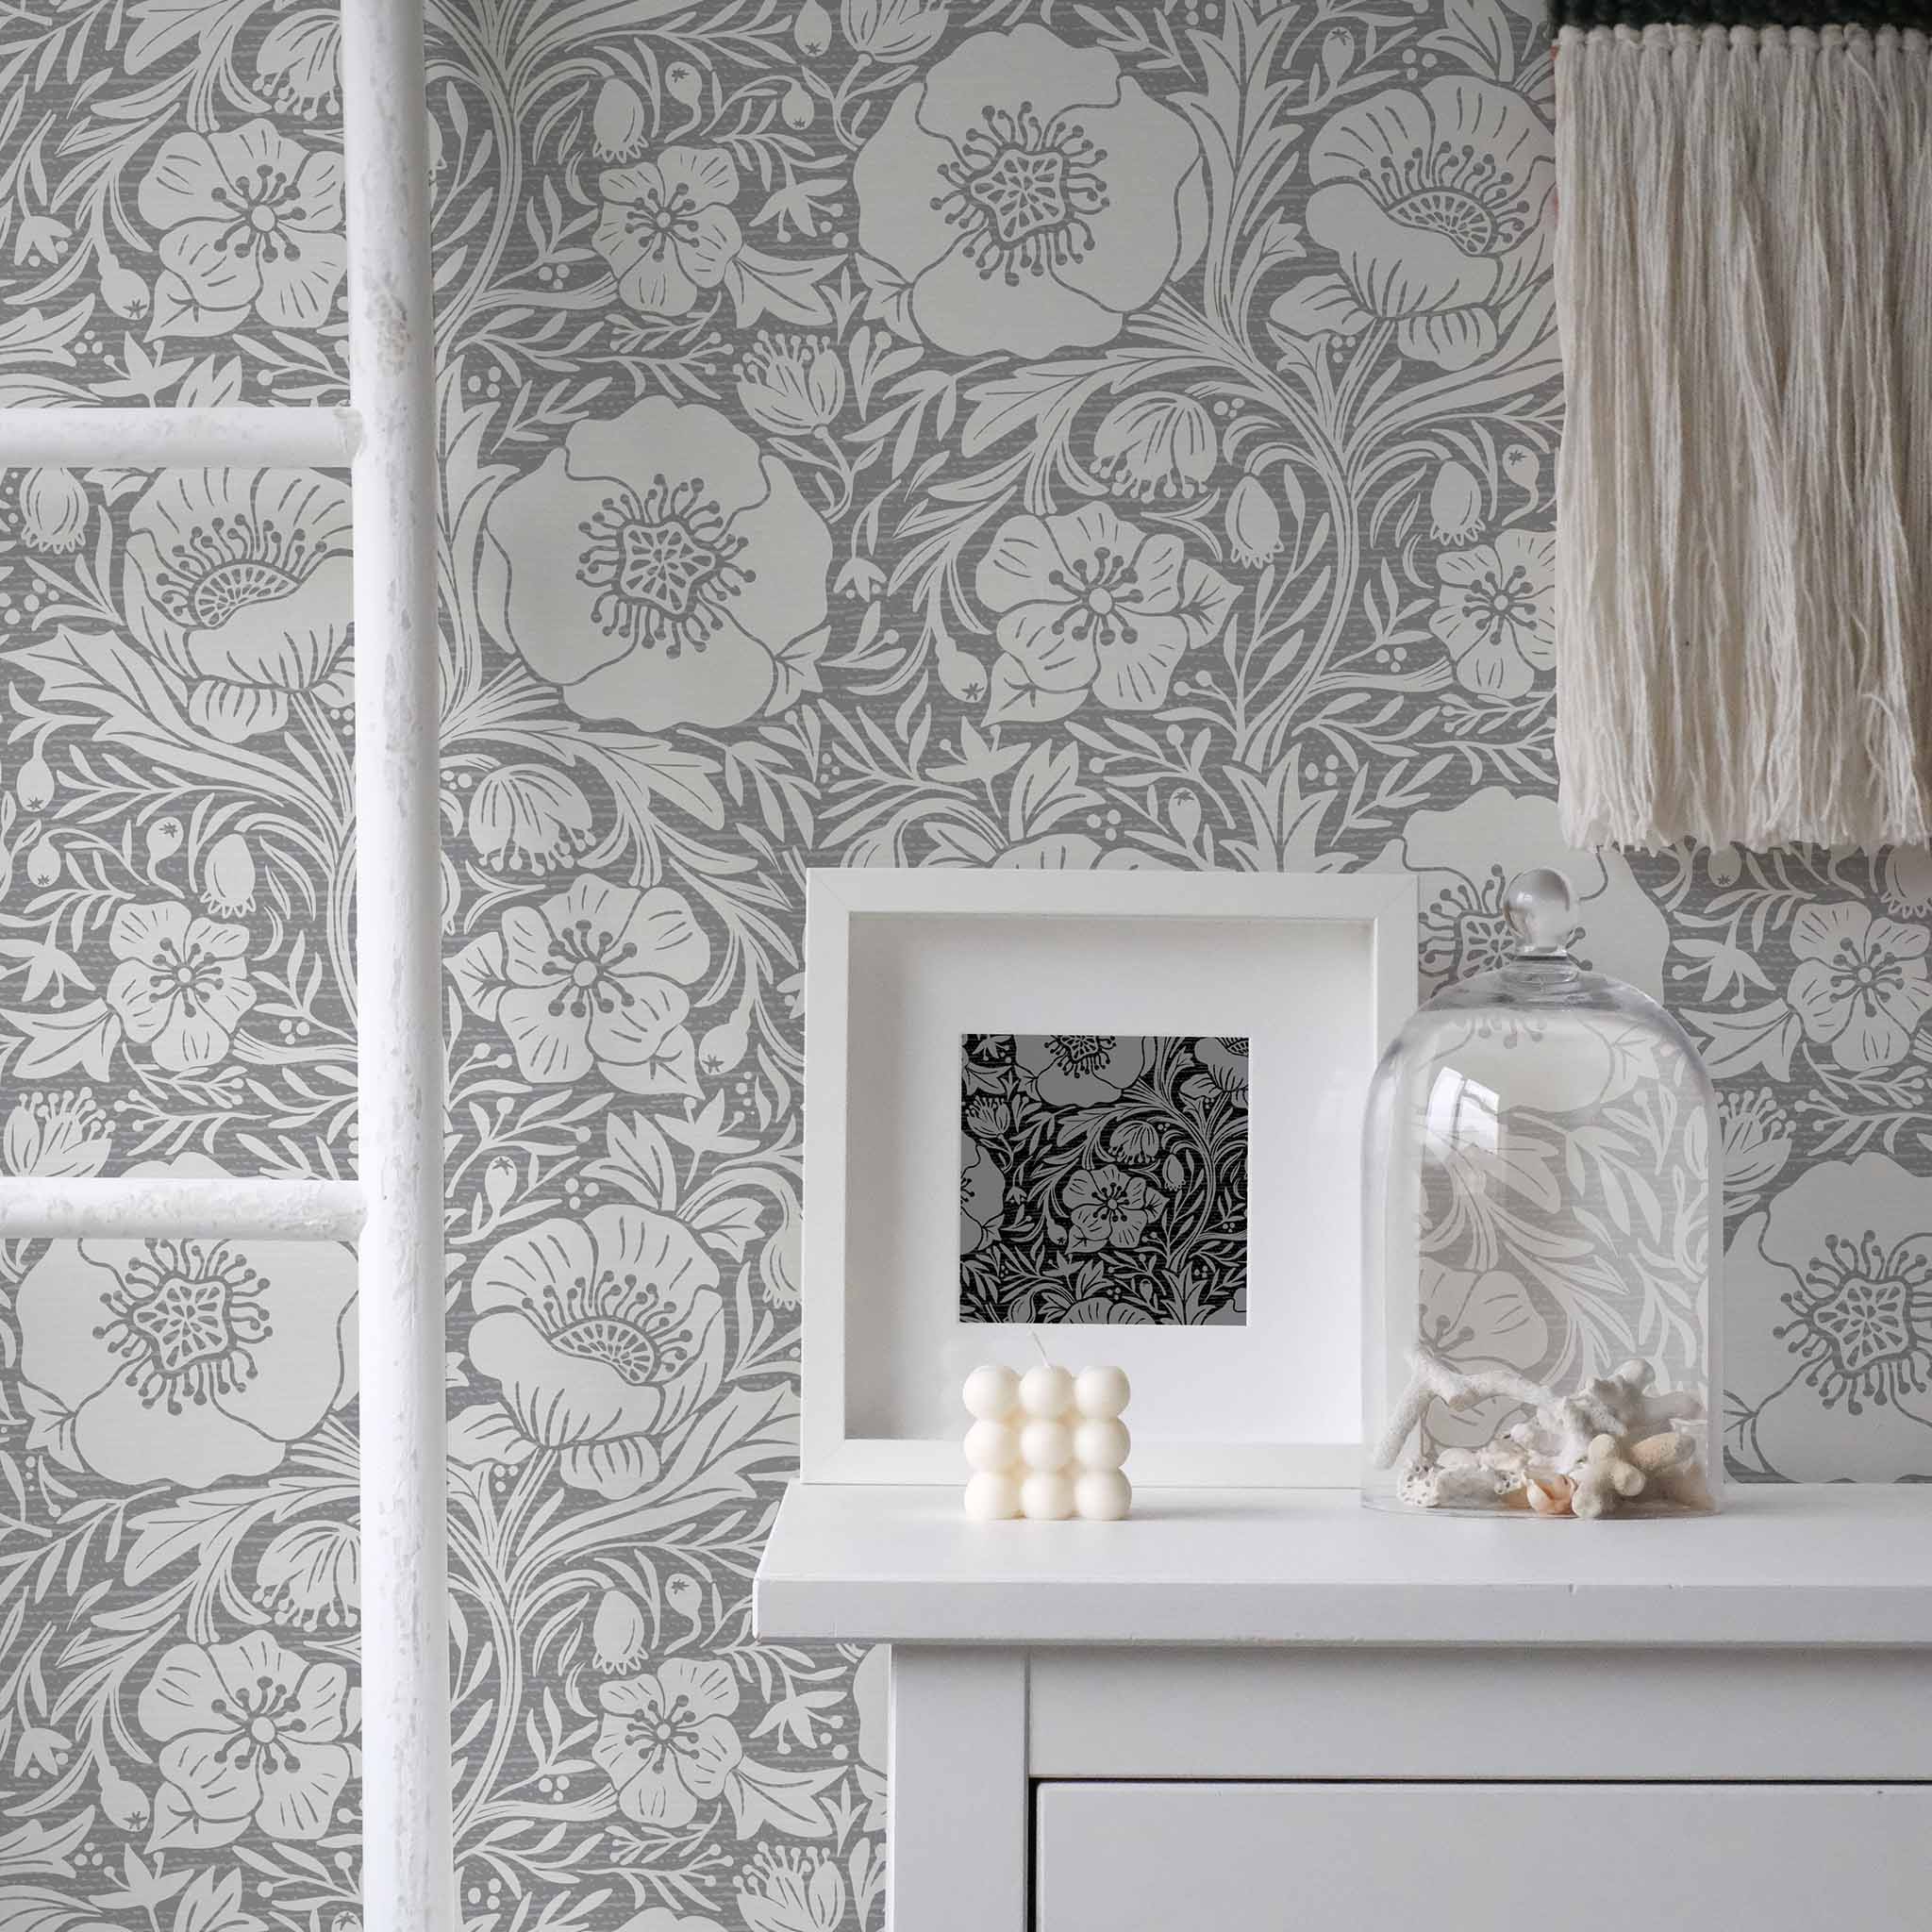 Poppy on Gray Pattern Peel & Stick or Pre-Pasted Removable Wallpaper.